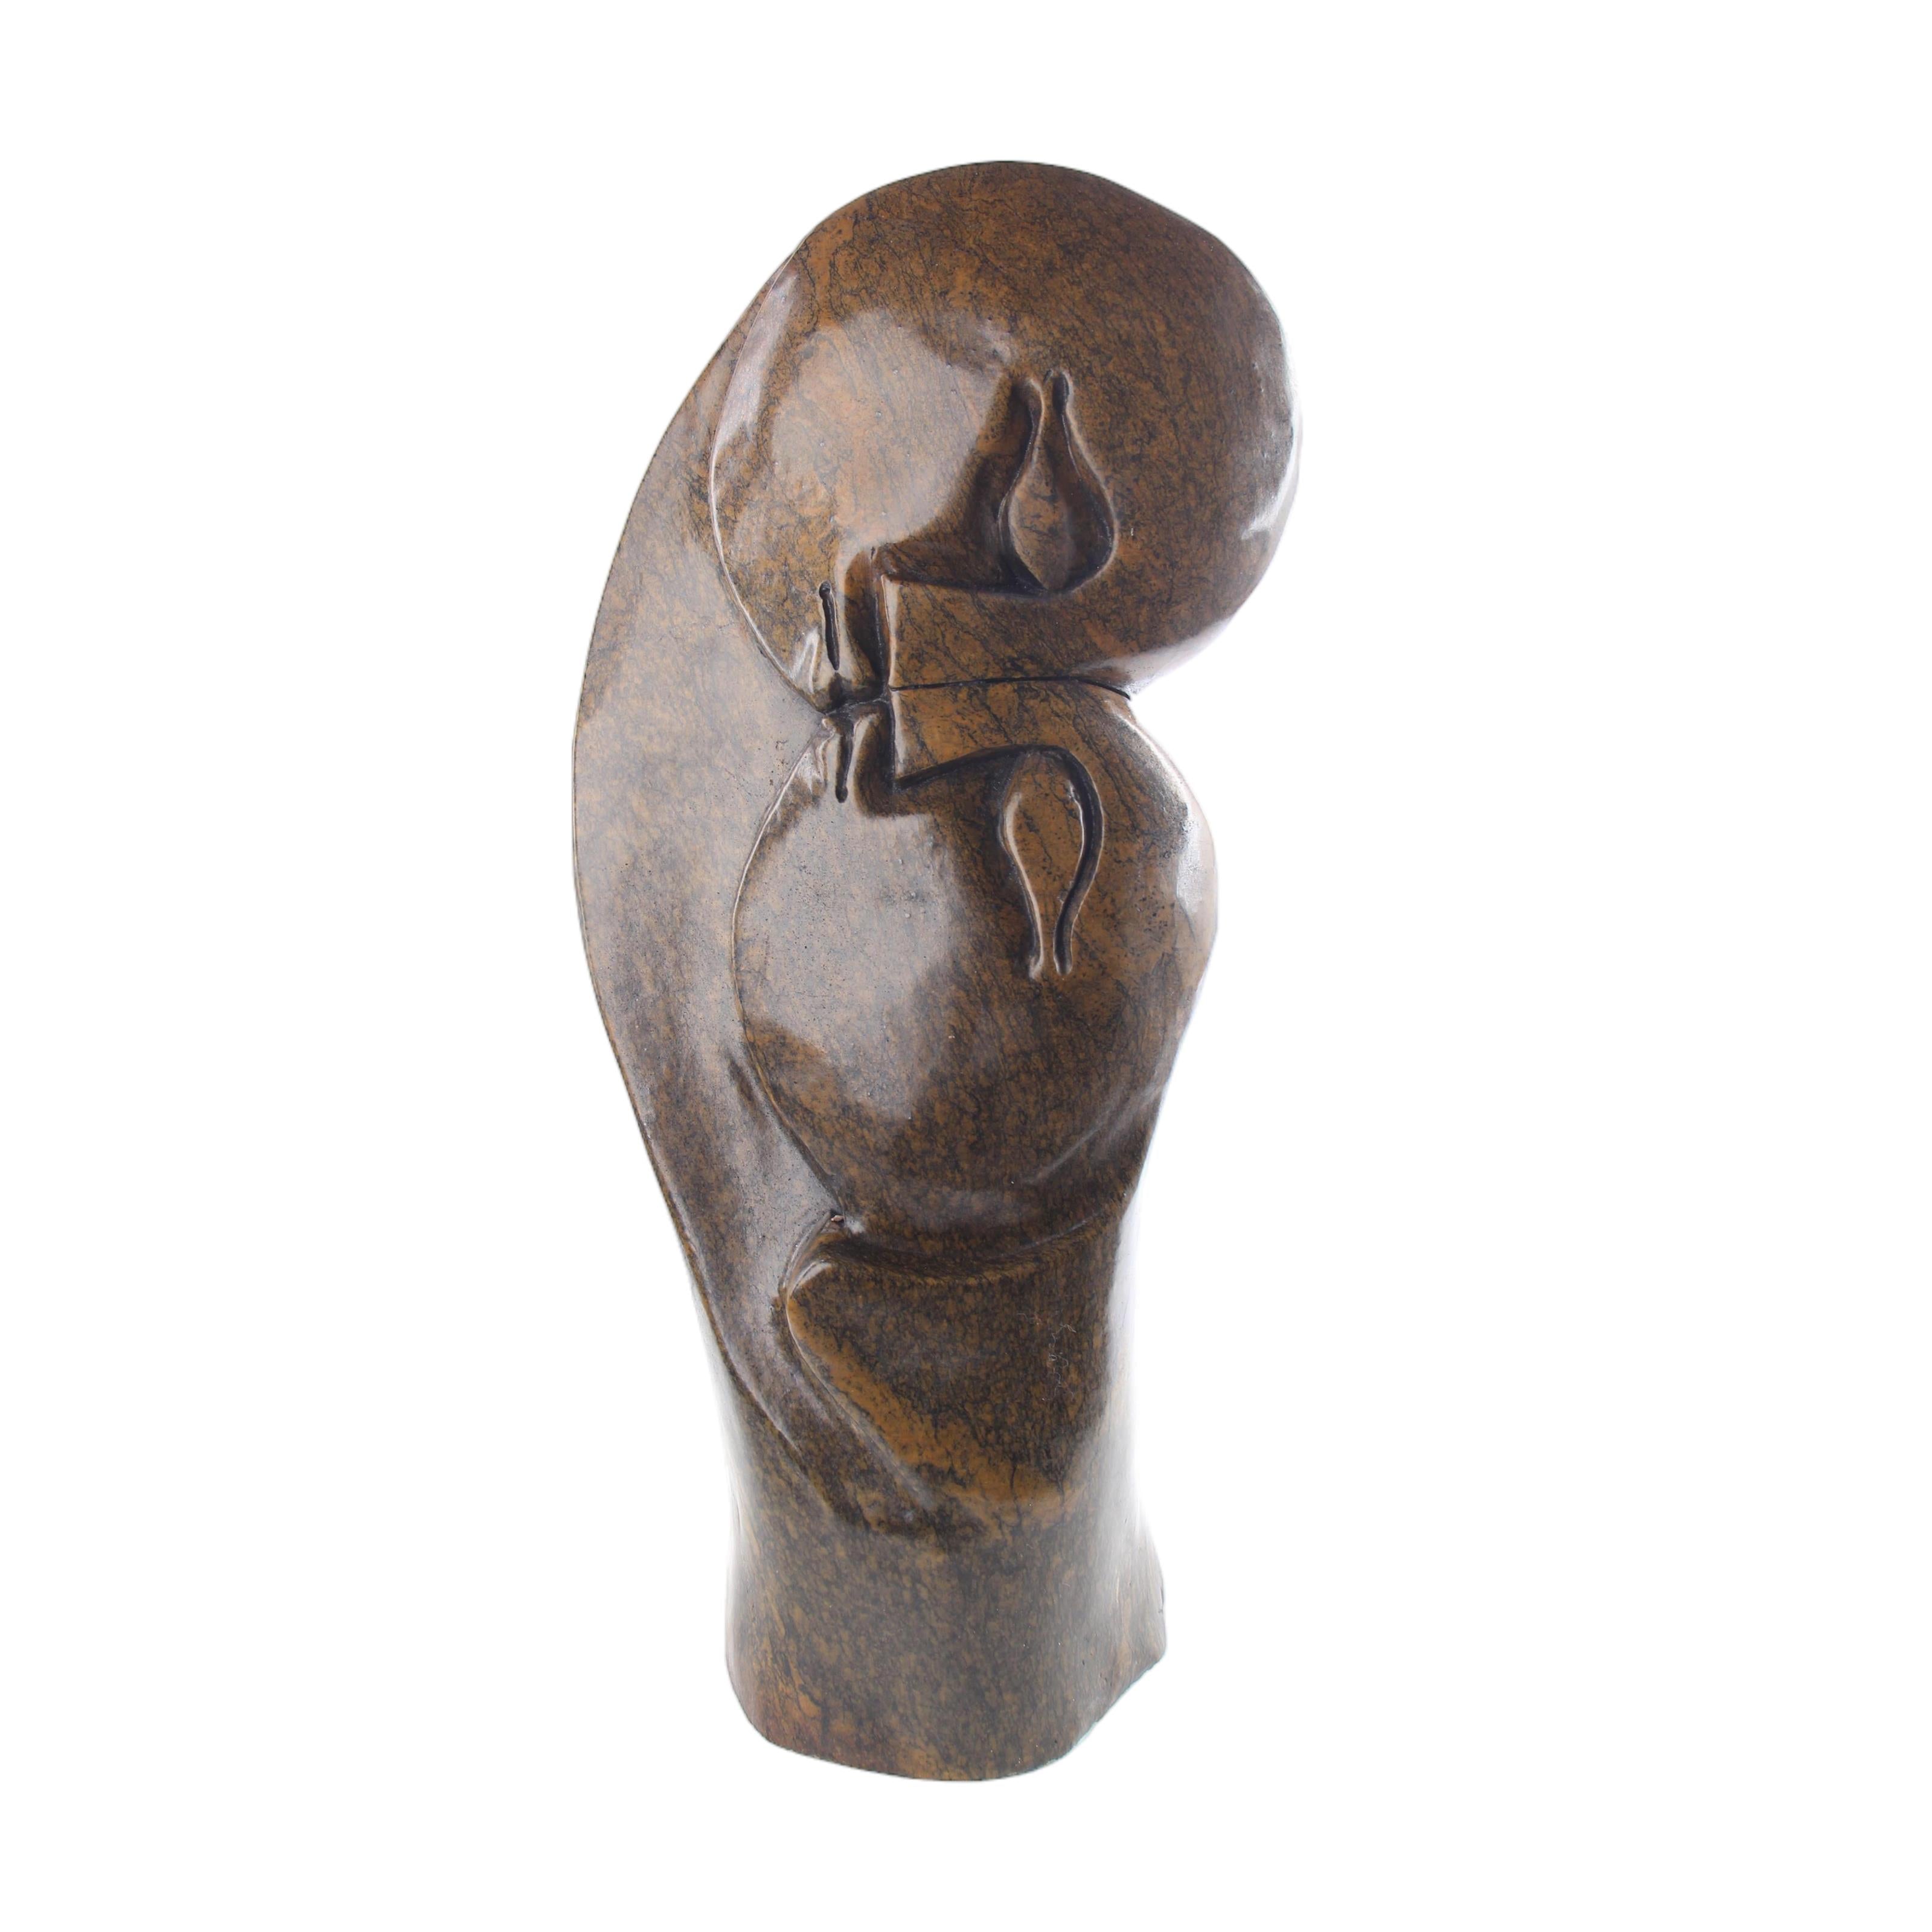 Shona Tribe Serpentine Stone Lovers ~19.3" Tall - Lovers